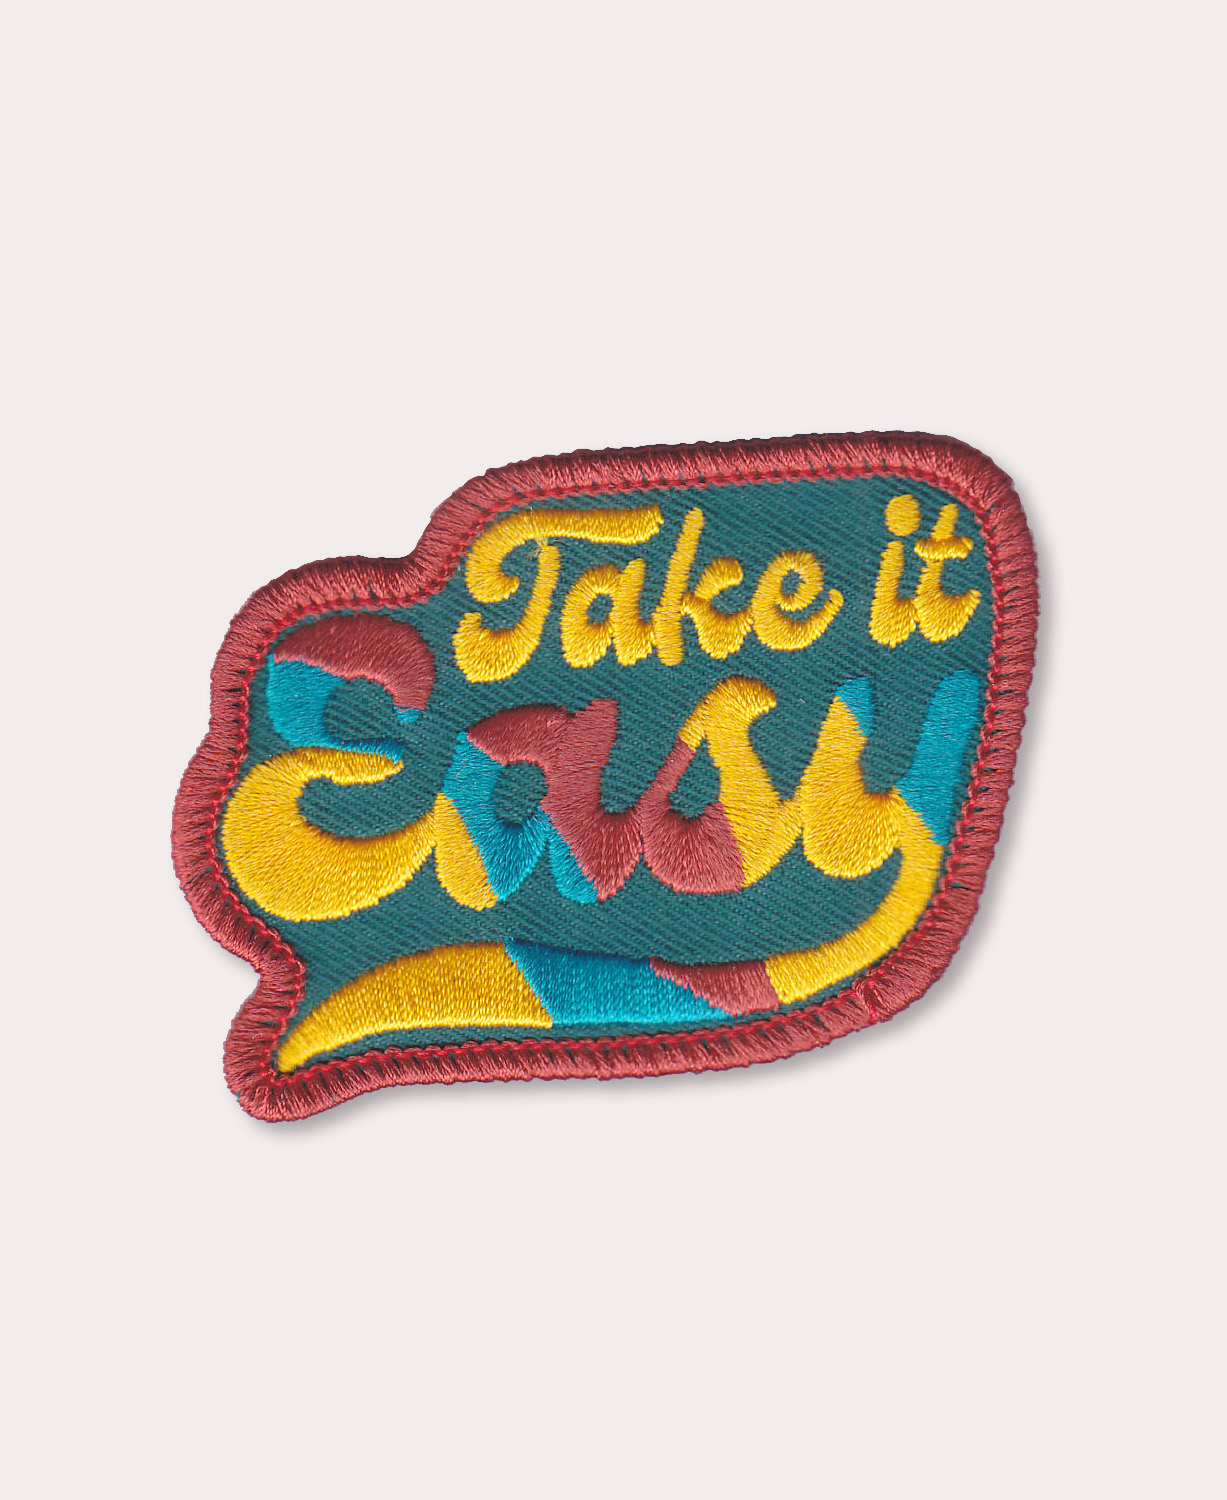 NEW! Take it Easy Iron-On Patch